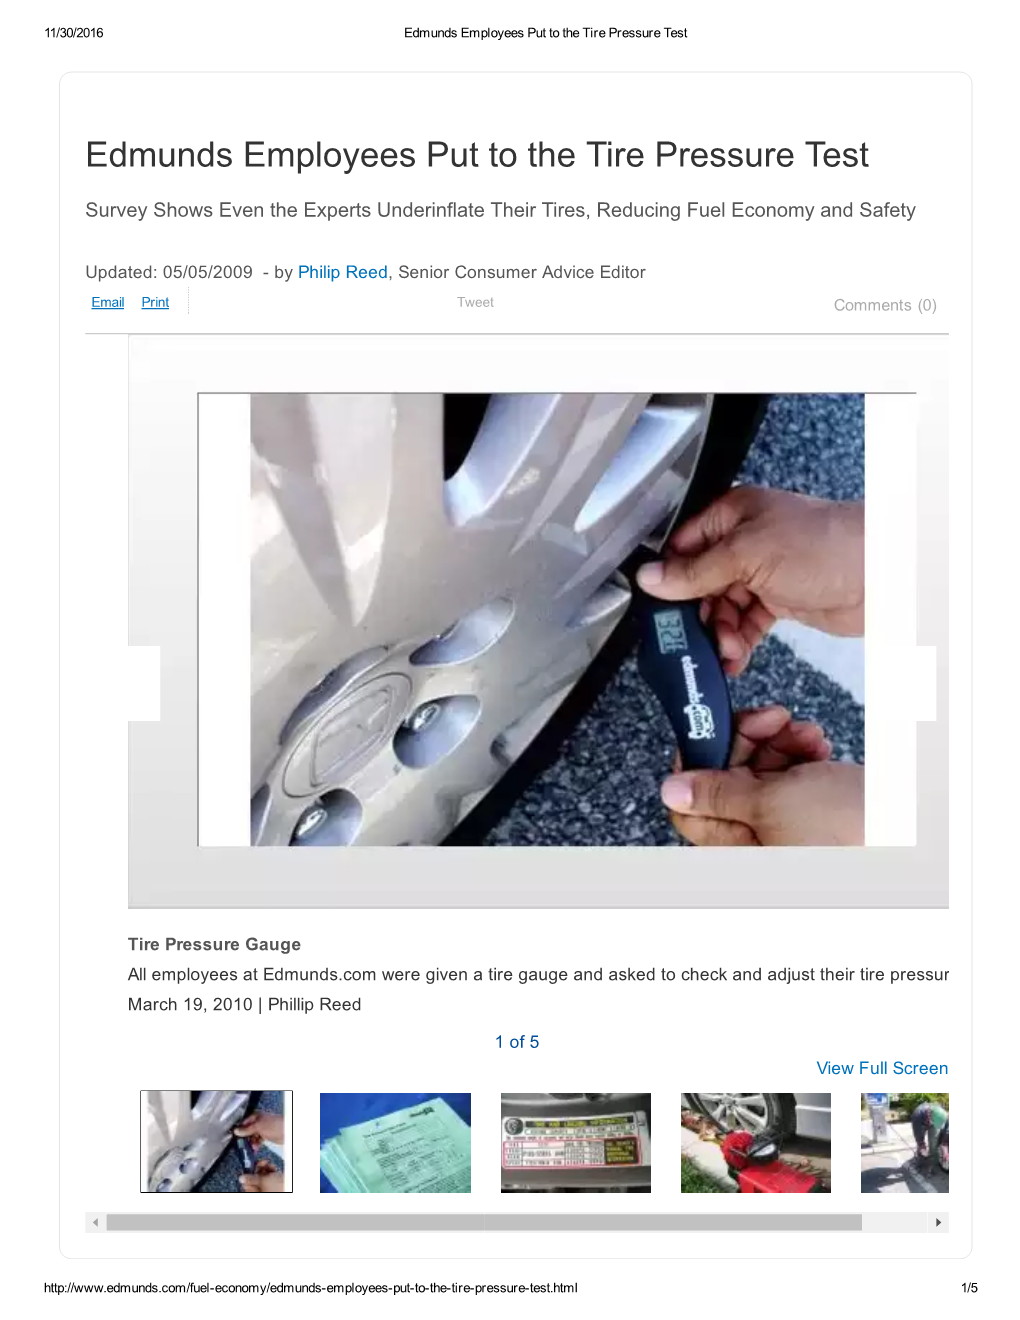 Edmunds Employees Put to the Tire Pressure Test